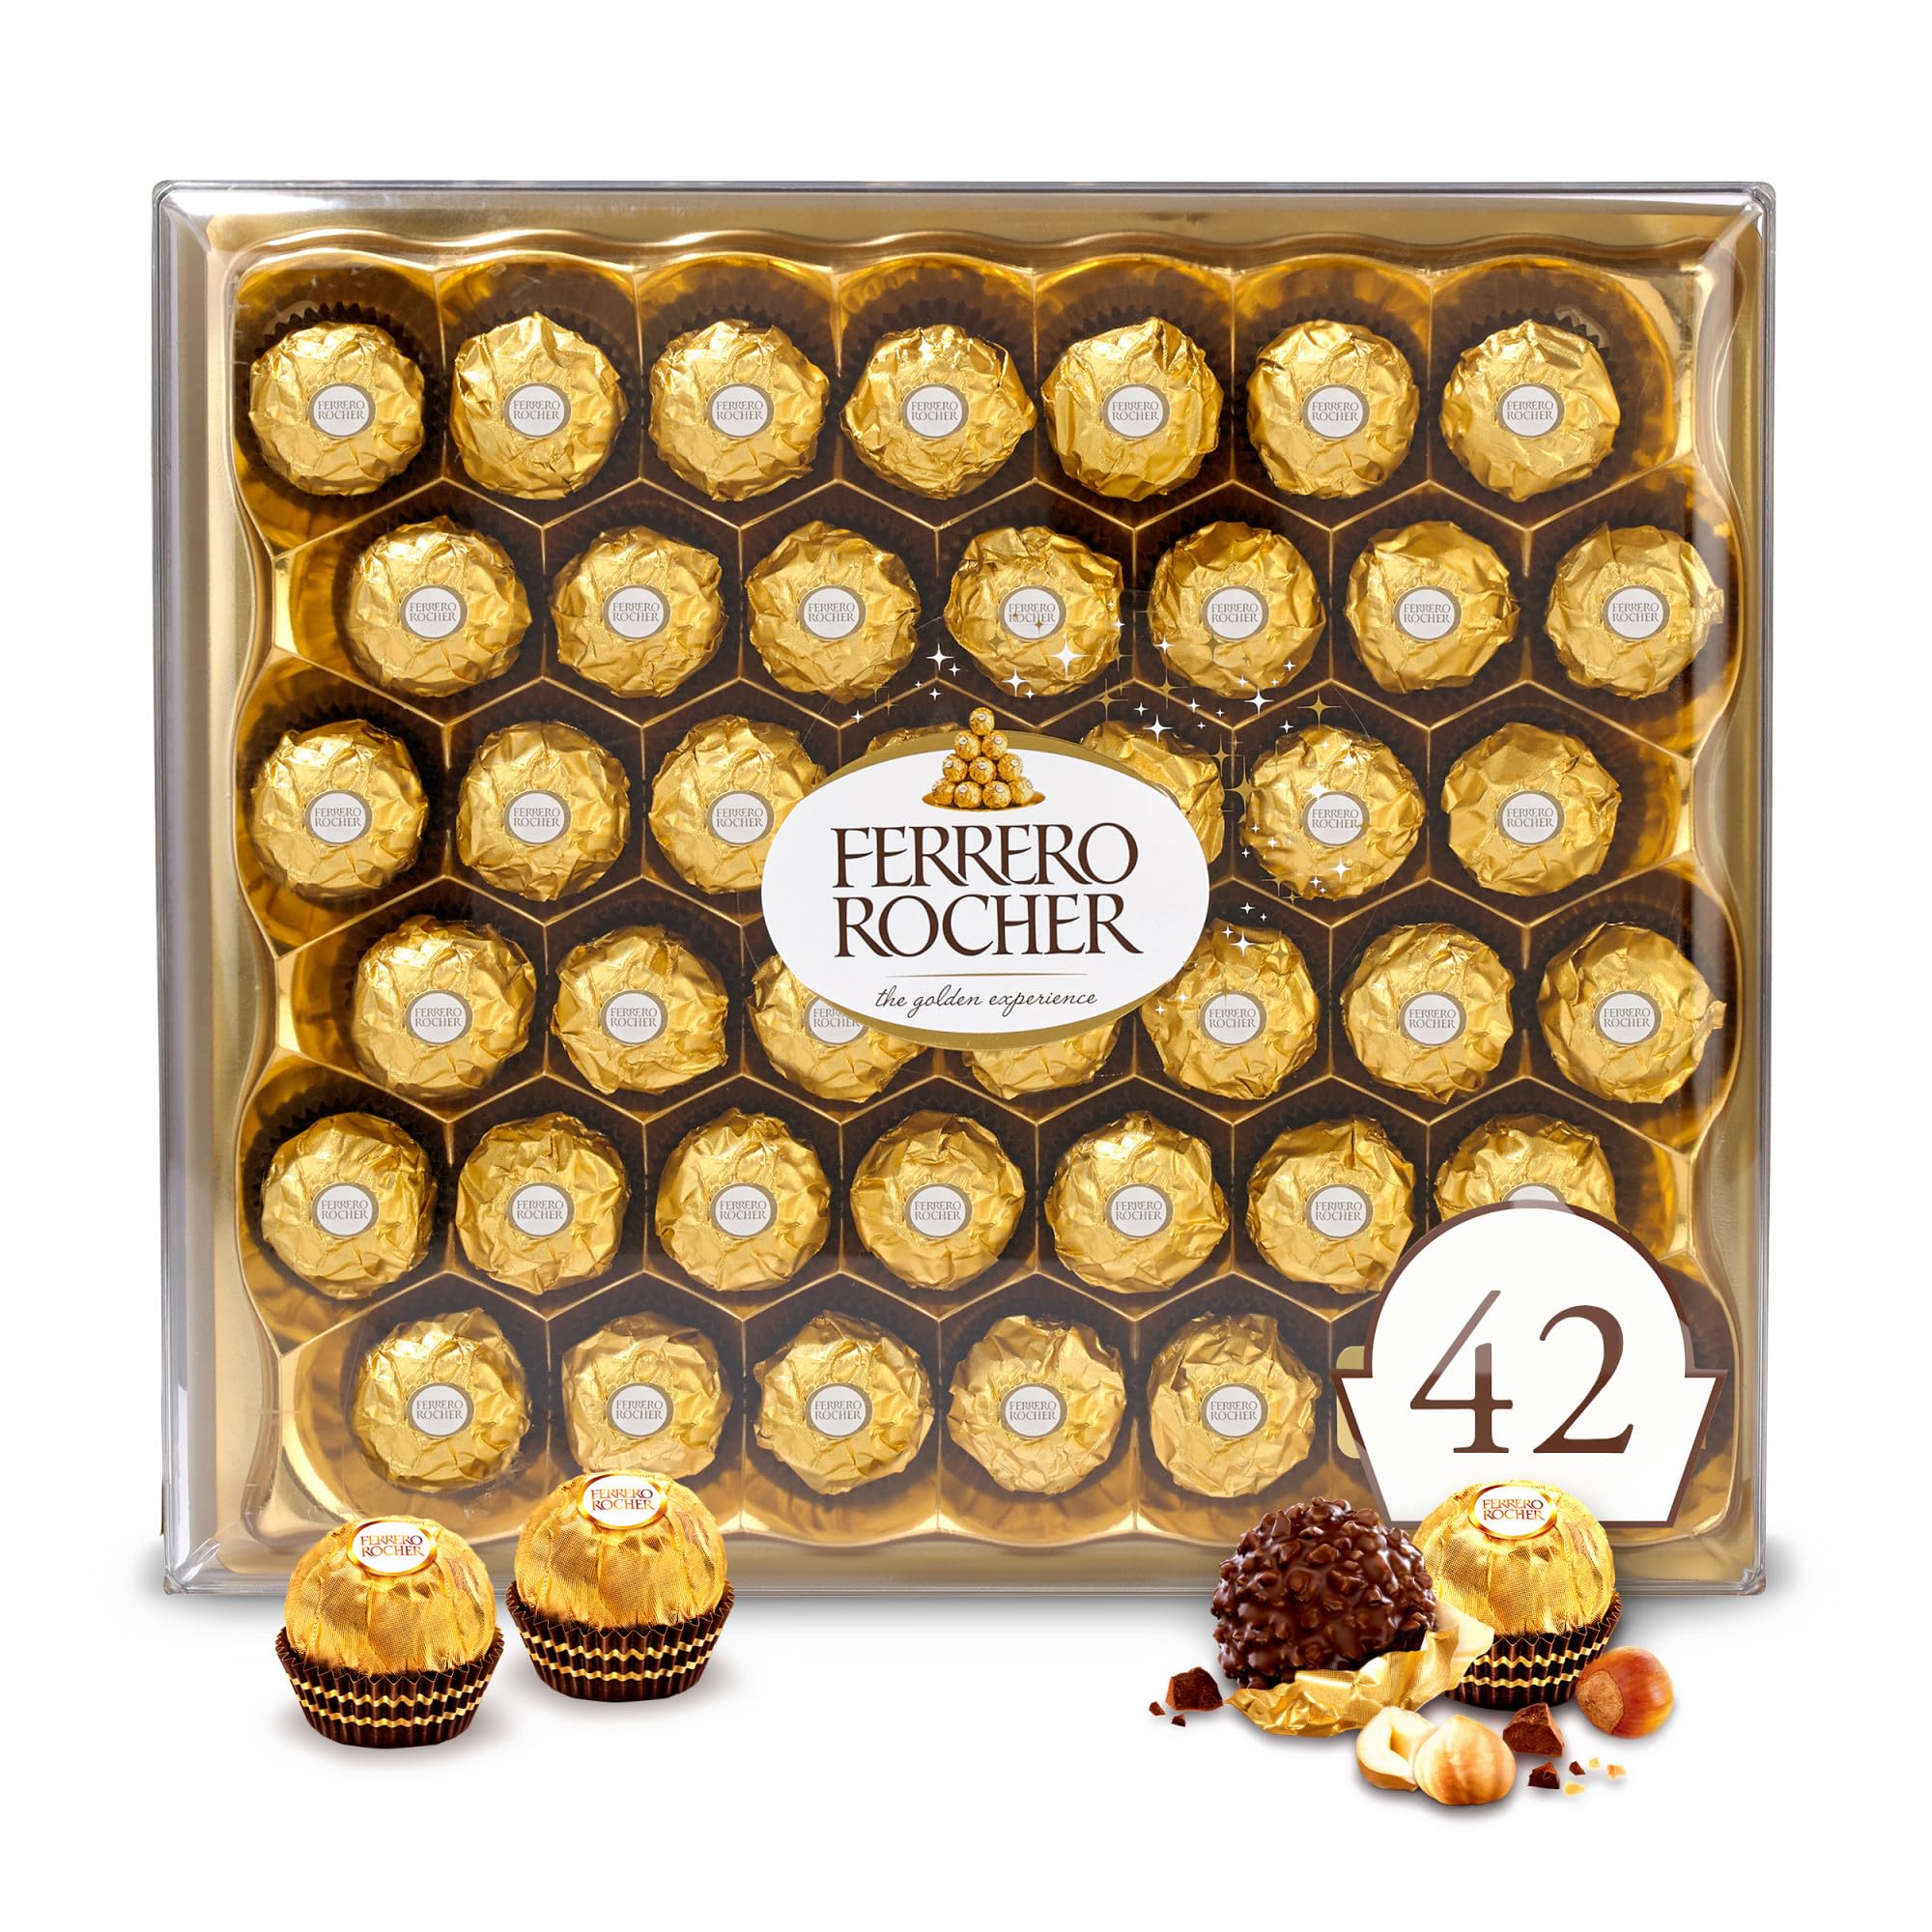 Ferrero Rocher, 42 Count, Premium Gourmet Milk Chocolate Hazelnut, Individually Wrapped Candy for Gifting, Great Easter Gift, 18.5 oz: $15.70